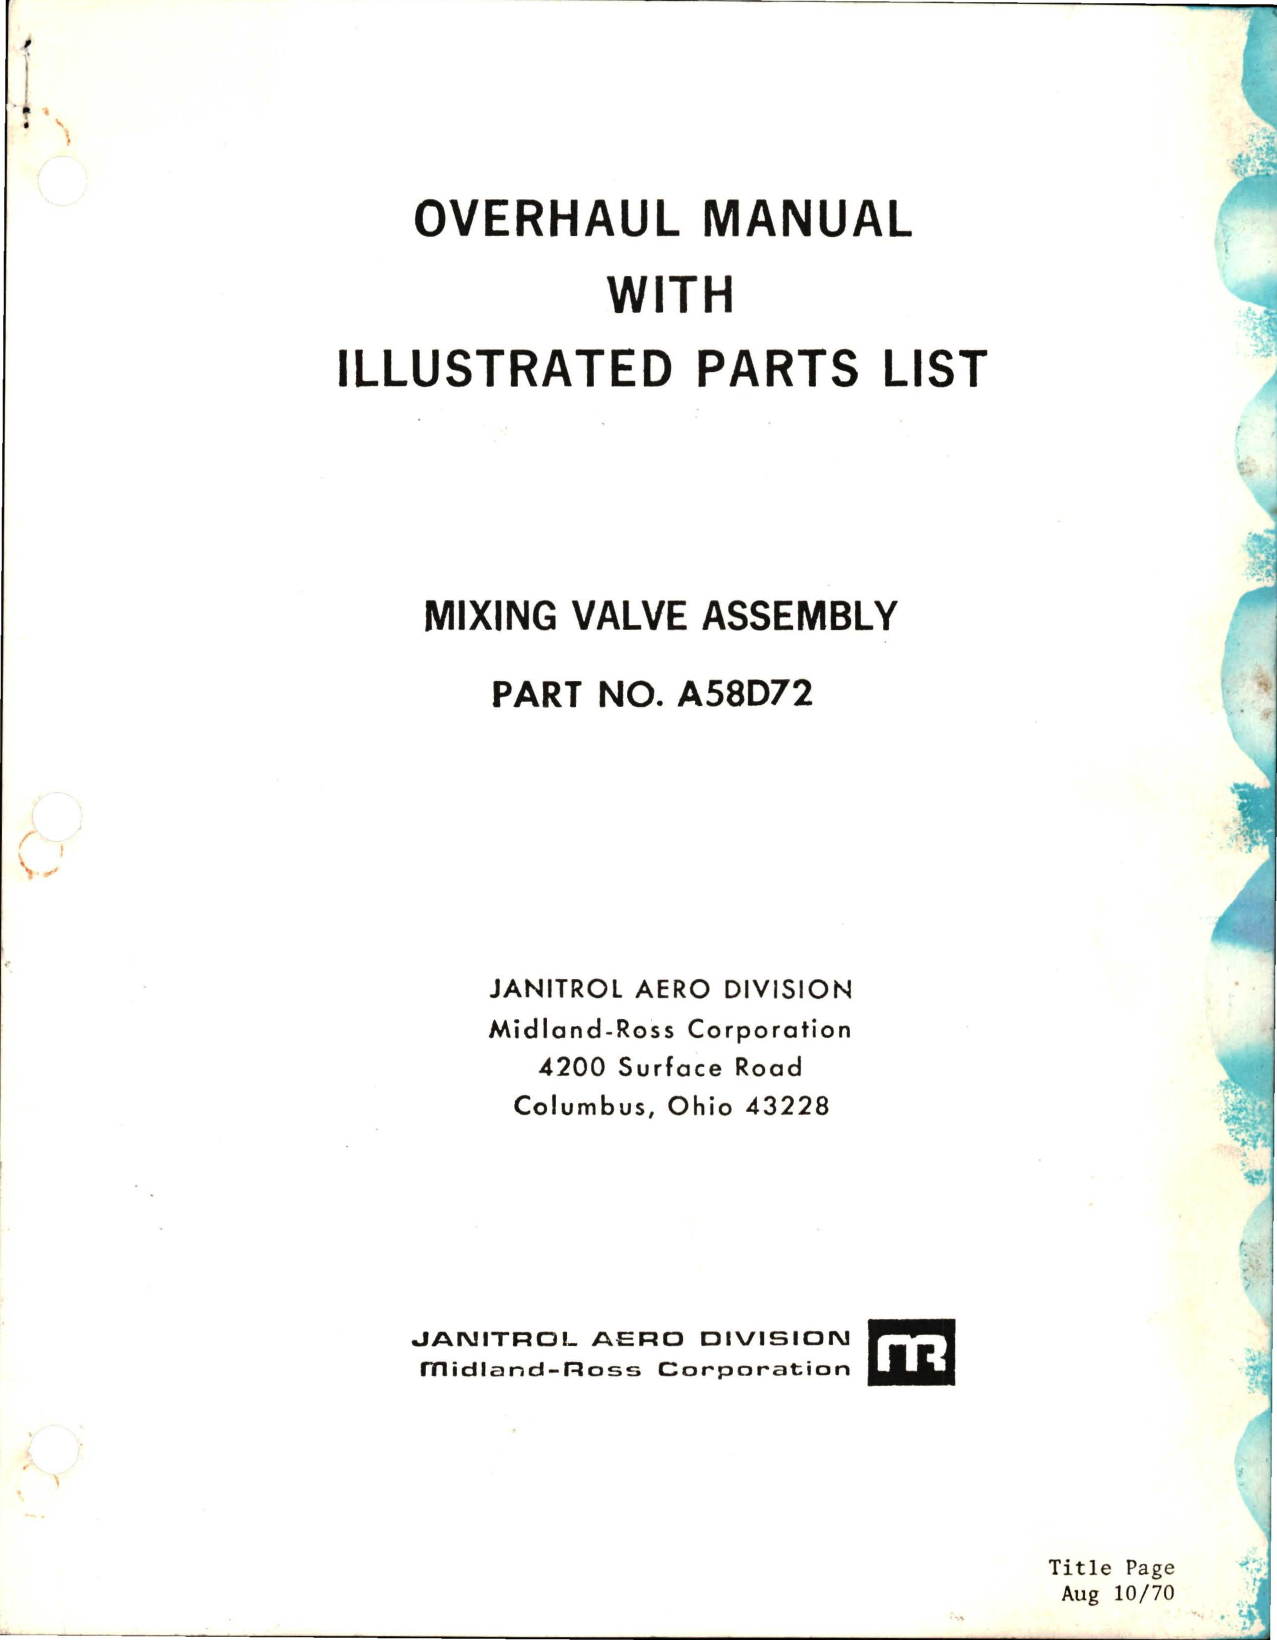 Sample page 1 from AirCorps Library document: Overhaul with Illustrated Parts List for Mixing Valve Assembly - Part A58D72 